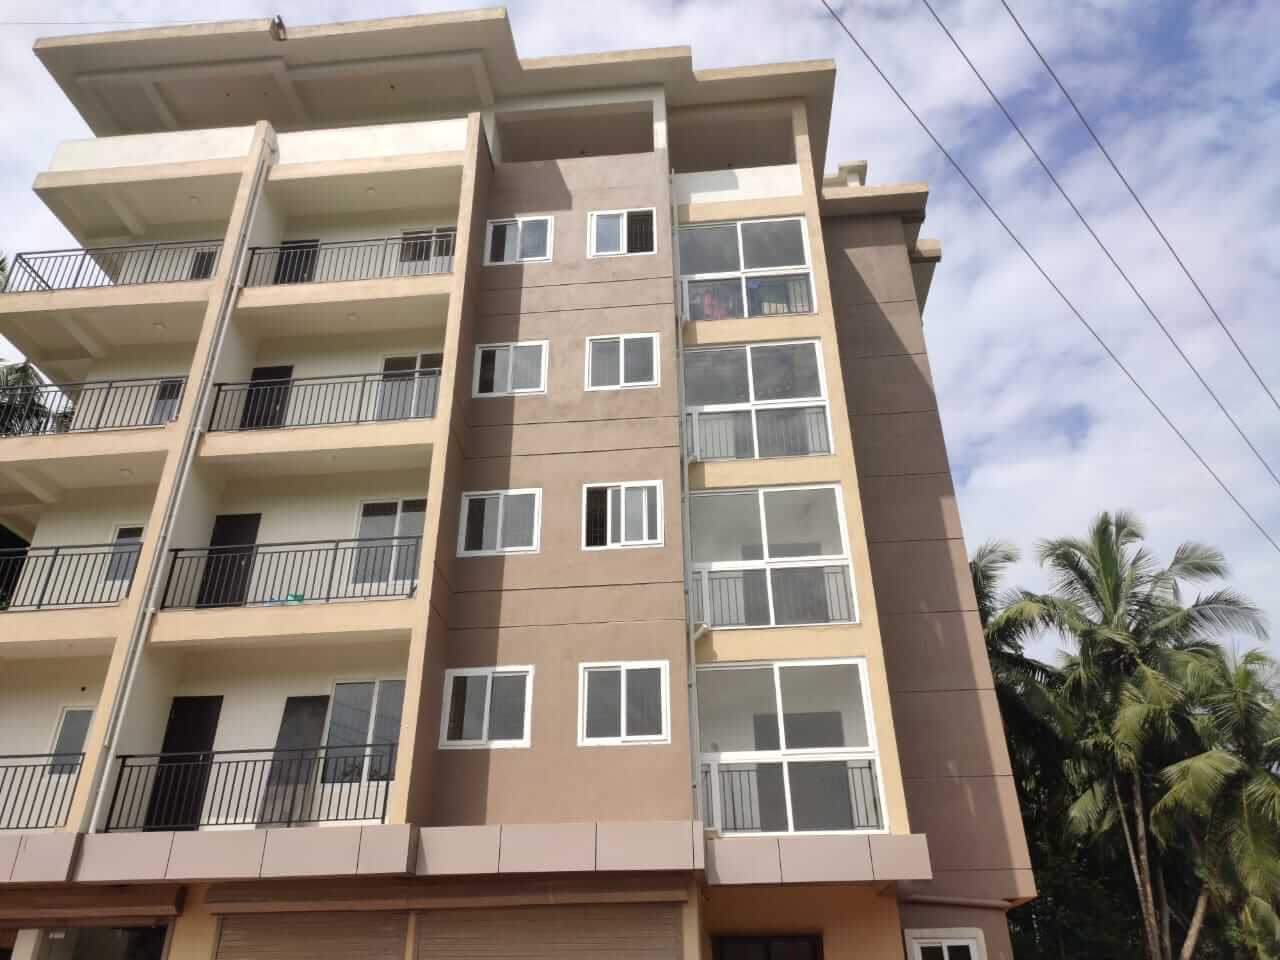 1 BHK Ready to occupy apartment available for sale at Mangaluru